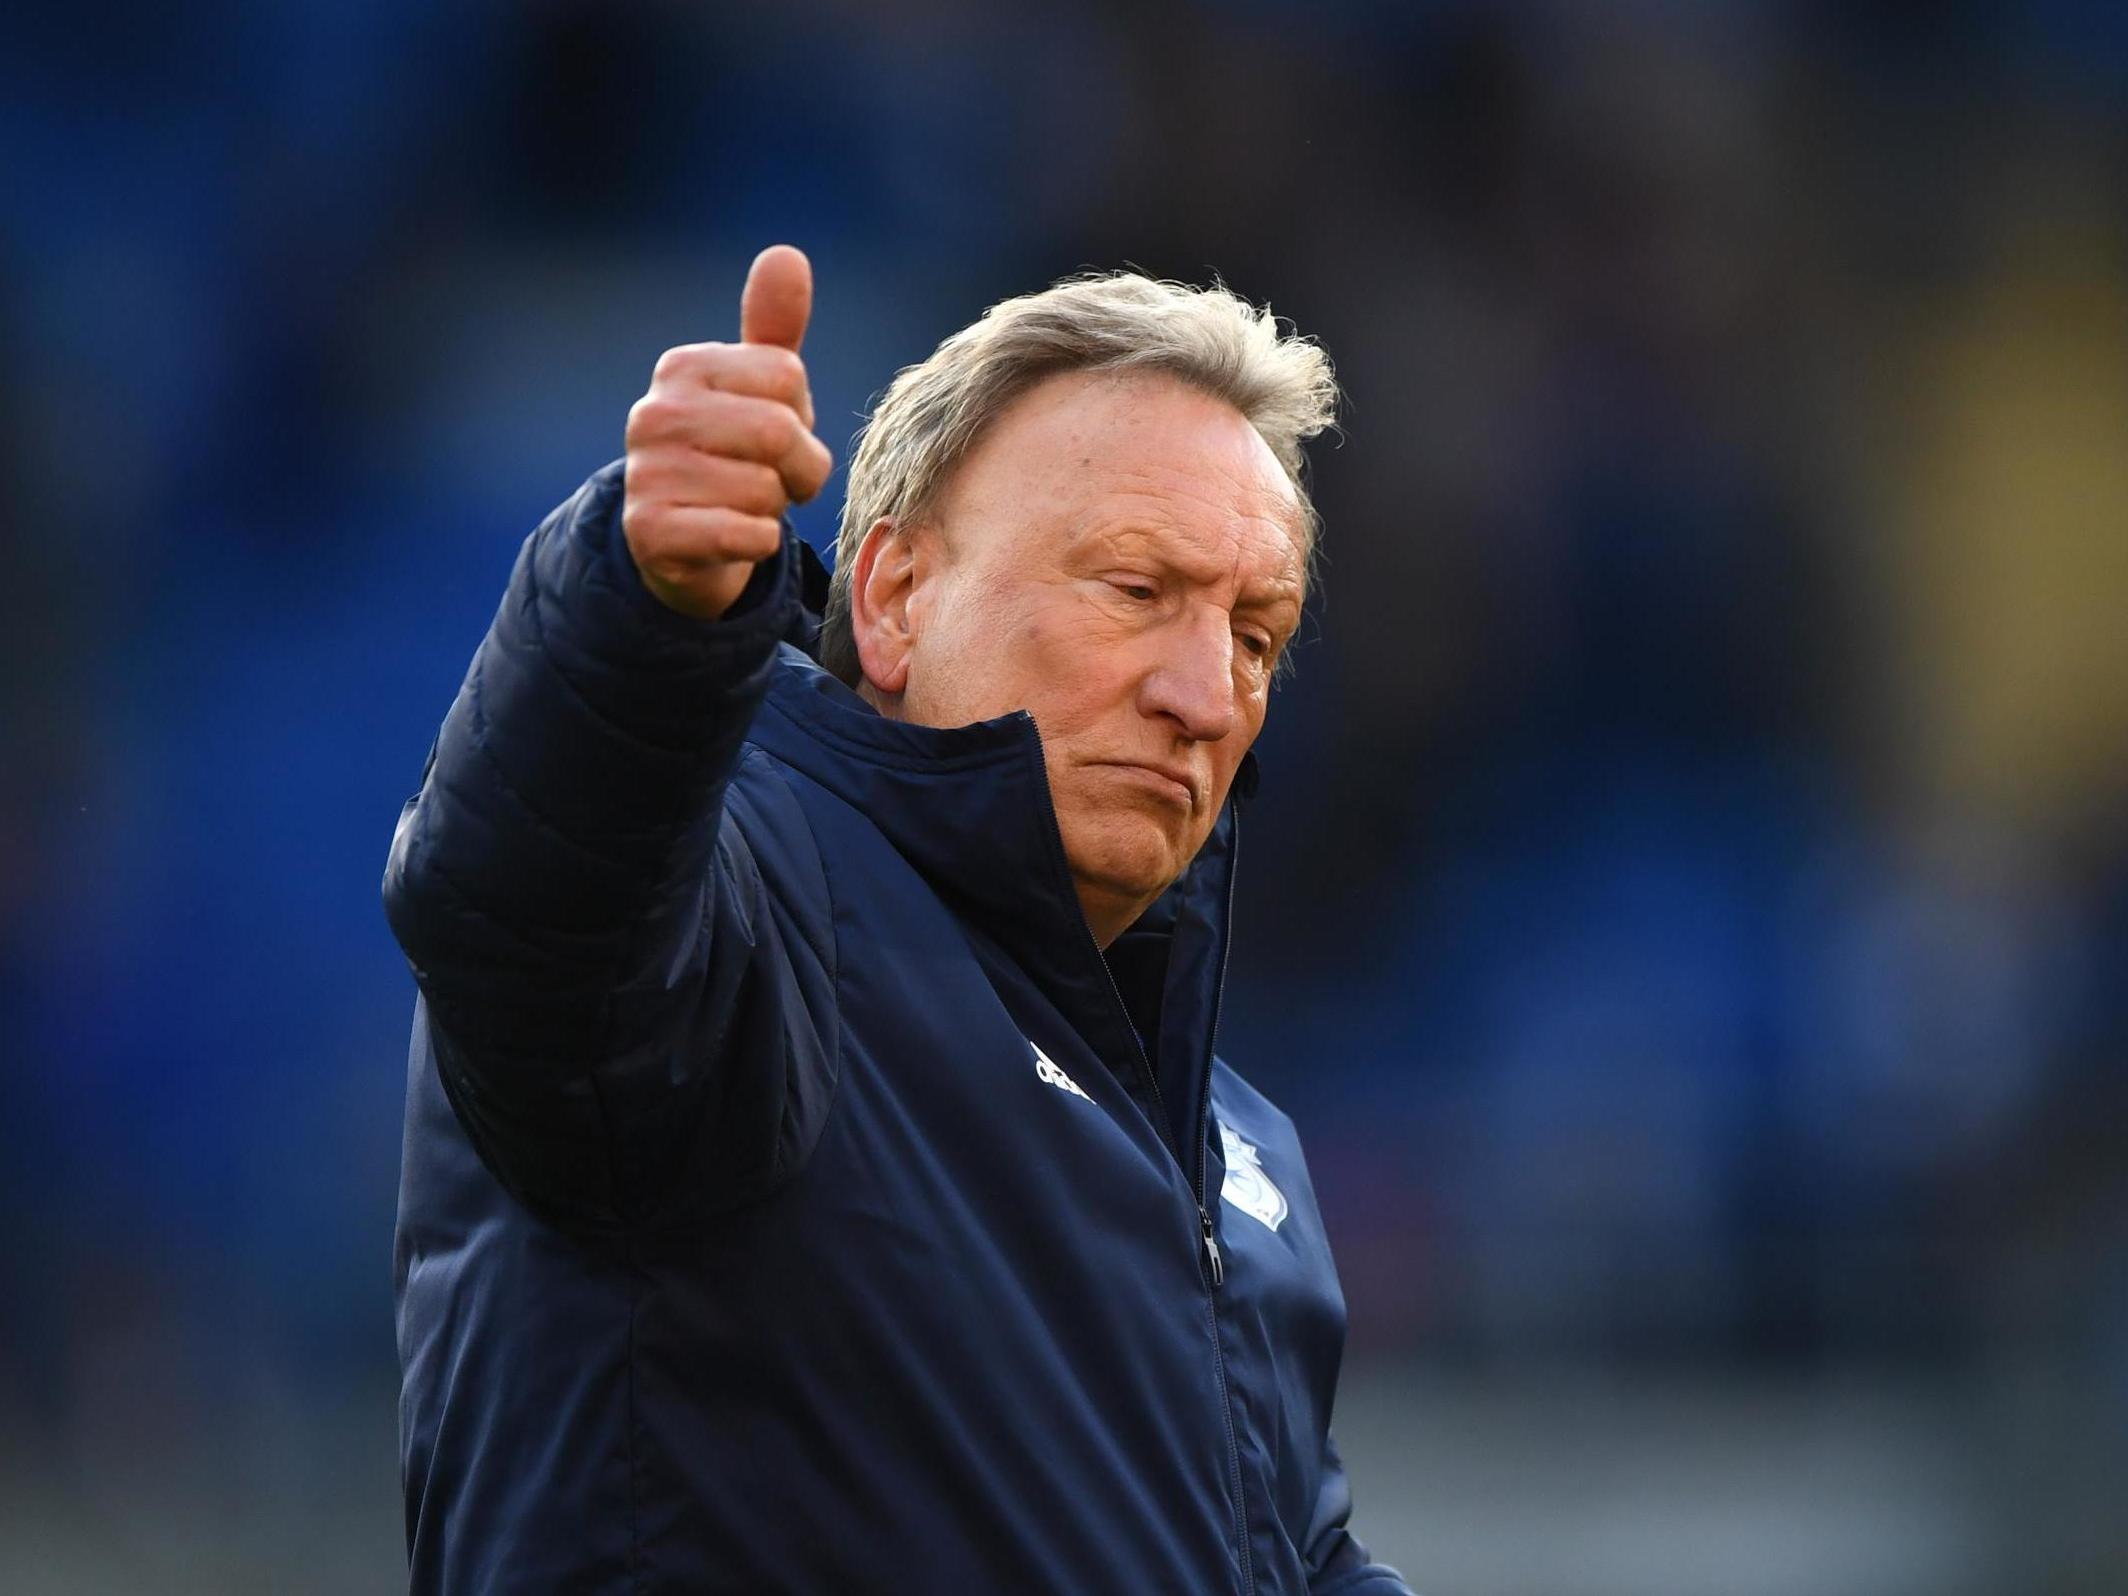 Neil Warnock built a rapport with fans during his time in charge